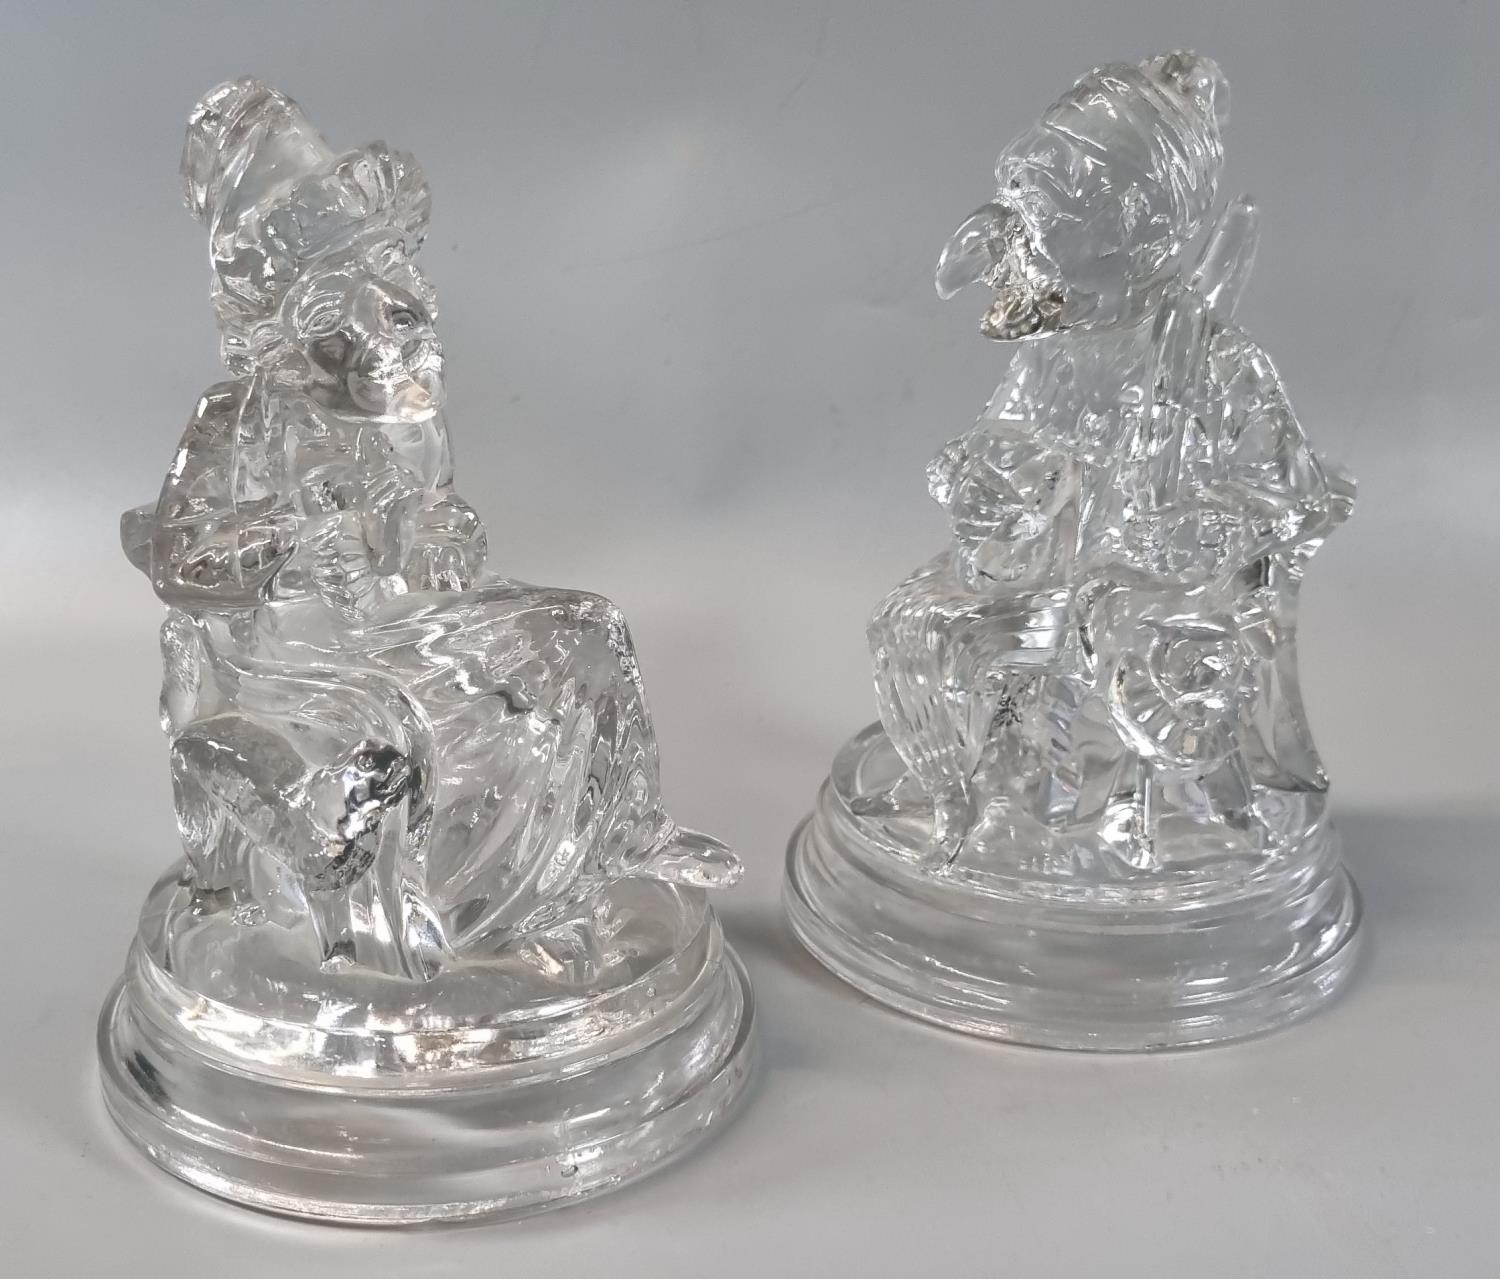 Pair of hollow clear moulded glass figures: 'Punch and Judy', on circular step bases with moulded